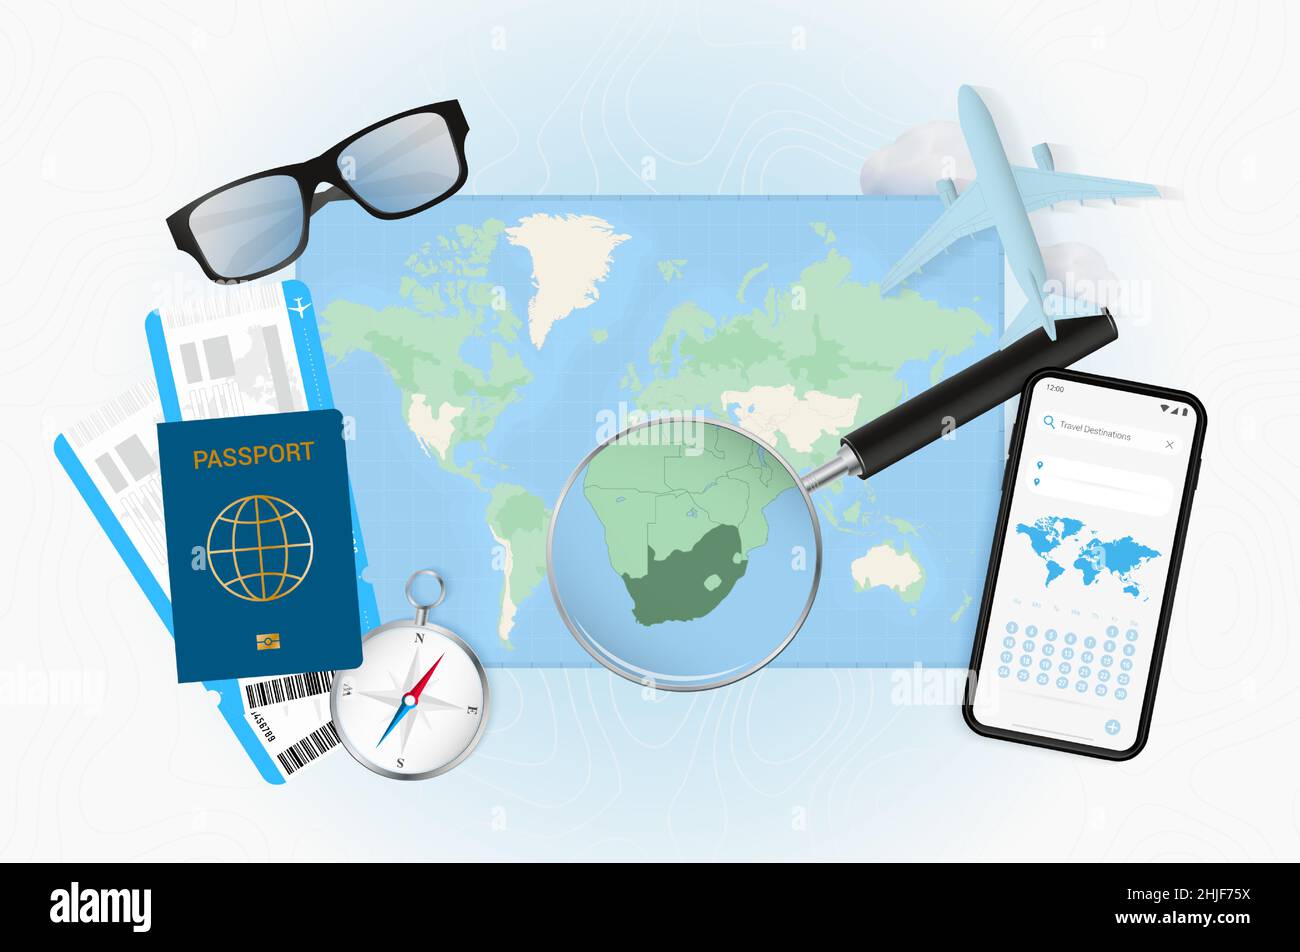 Conceptual illustration of a trip to South Africa with travel gear. World map with compass, passport, tickets, cell phone, plane and glass. Stock Vector